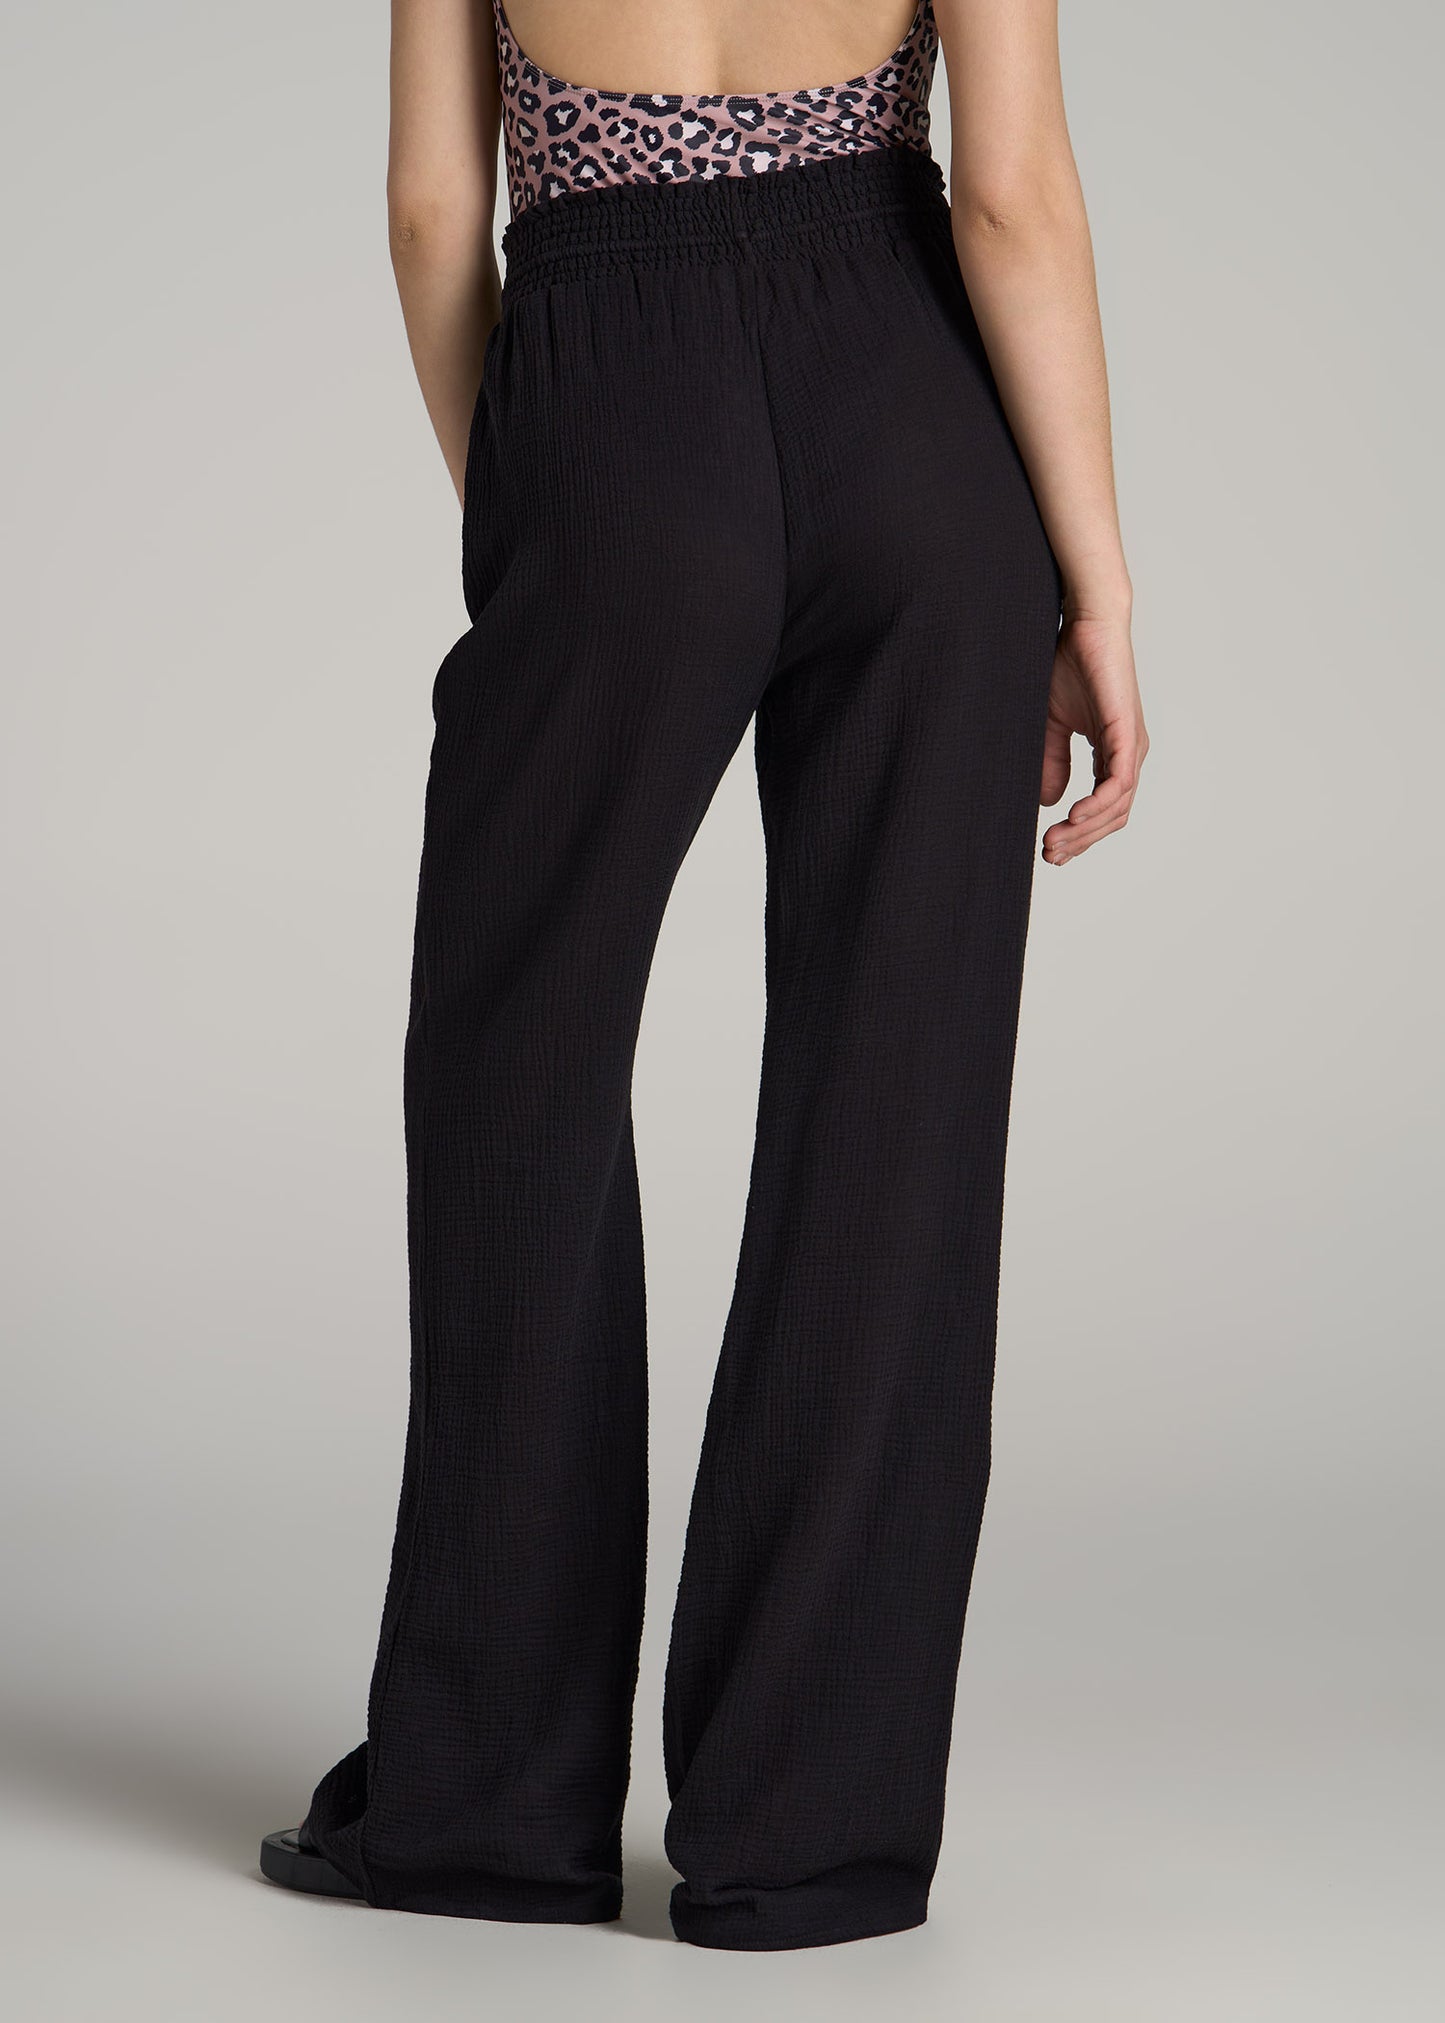 Gauze Cover Up Pants for Tall Women in Black